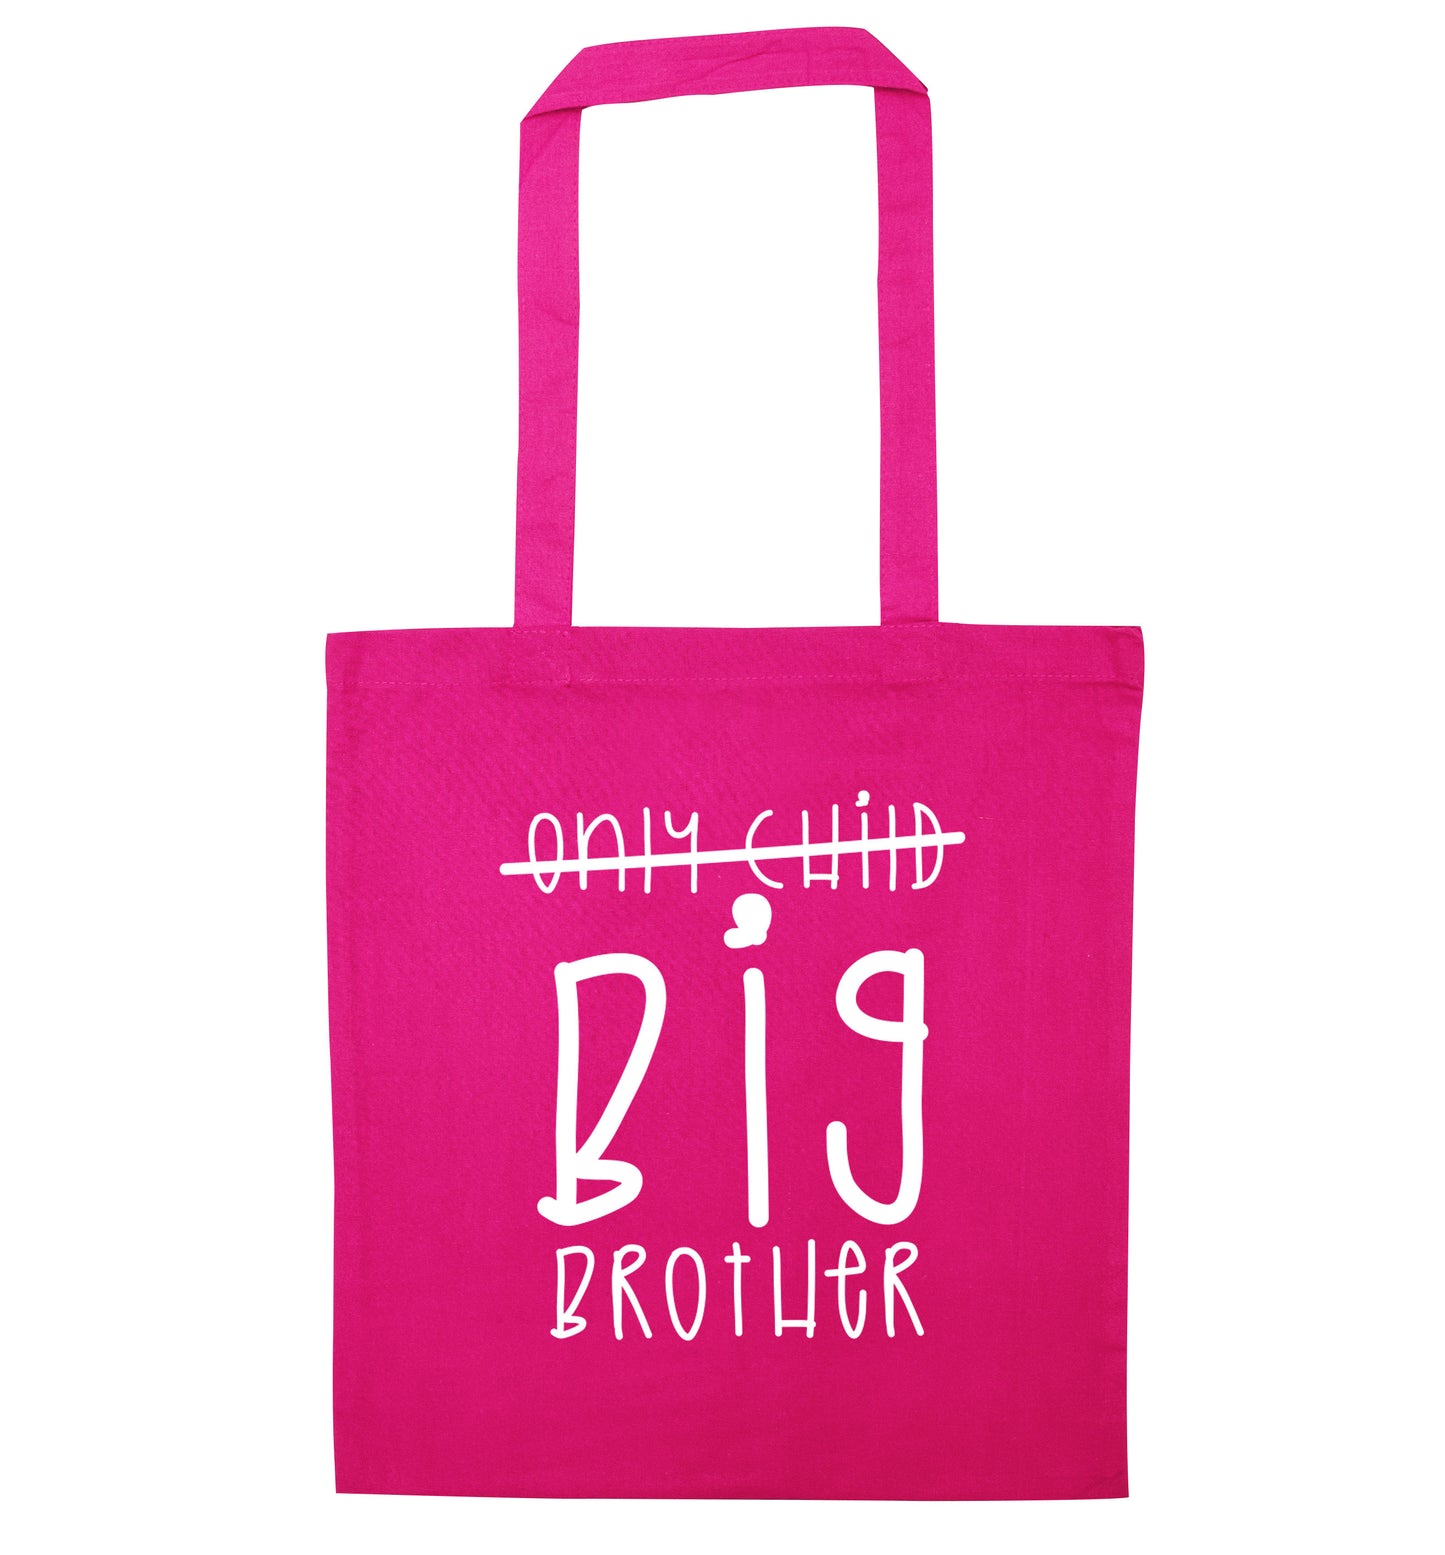 Only child big brother pink tote bag